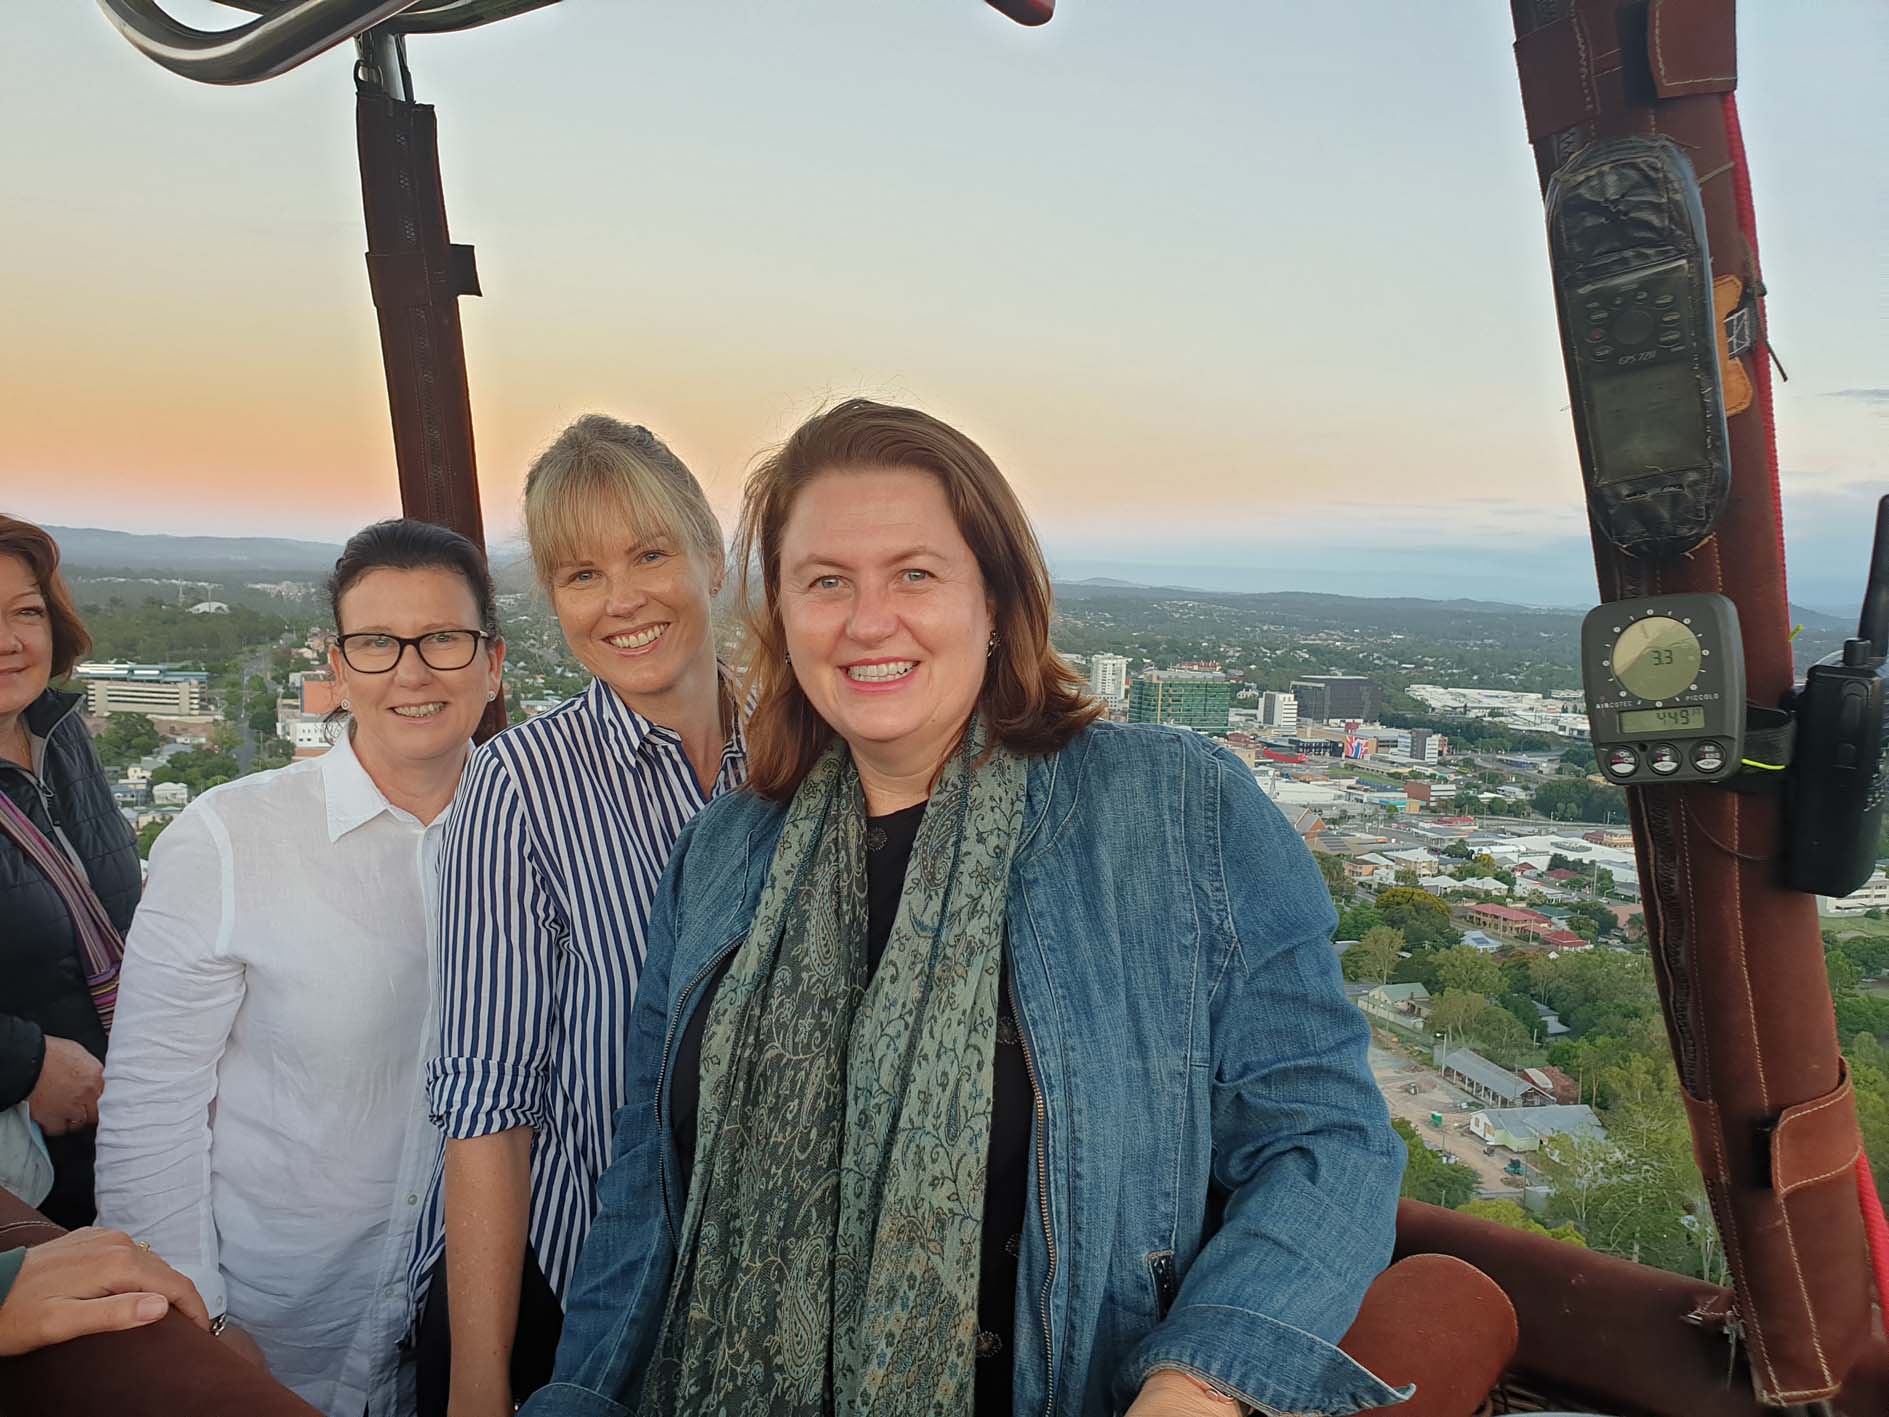 Ipswich Mayor Teresa Harding (right), Cr Nicole Jonic (middle) and Cr Marnie Doyle (left) had the chance to take a Floating Images Hot Air Balloon flight in 2021